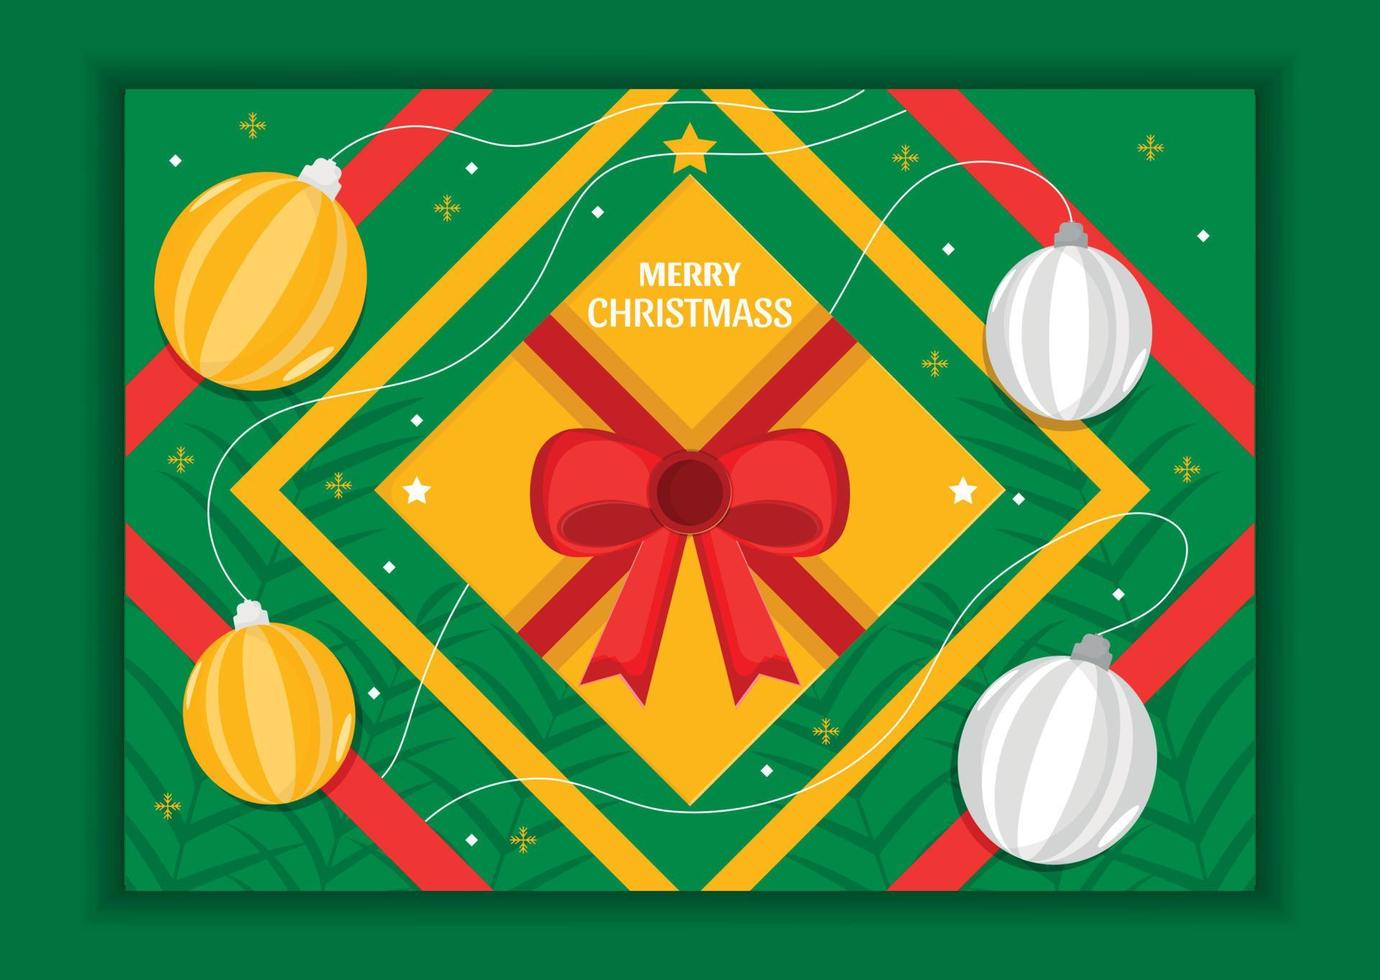 Flat Vector background illustration Merry Christmas concept